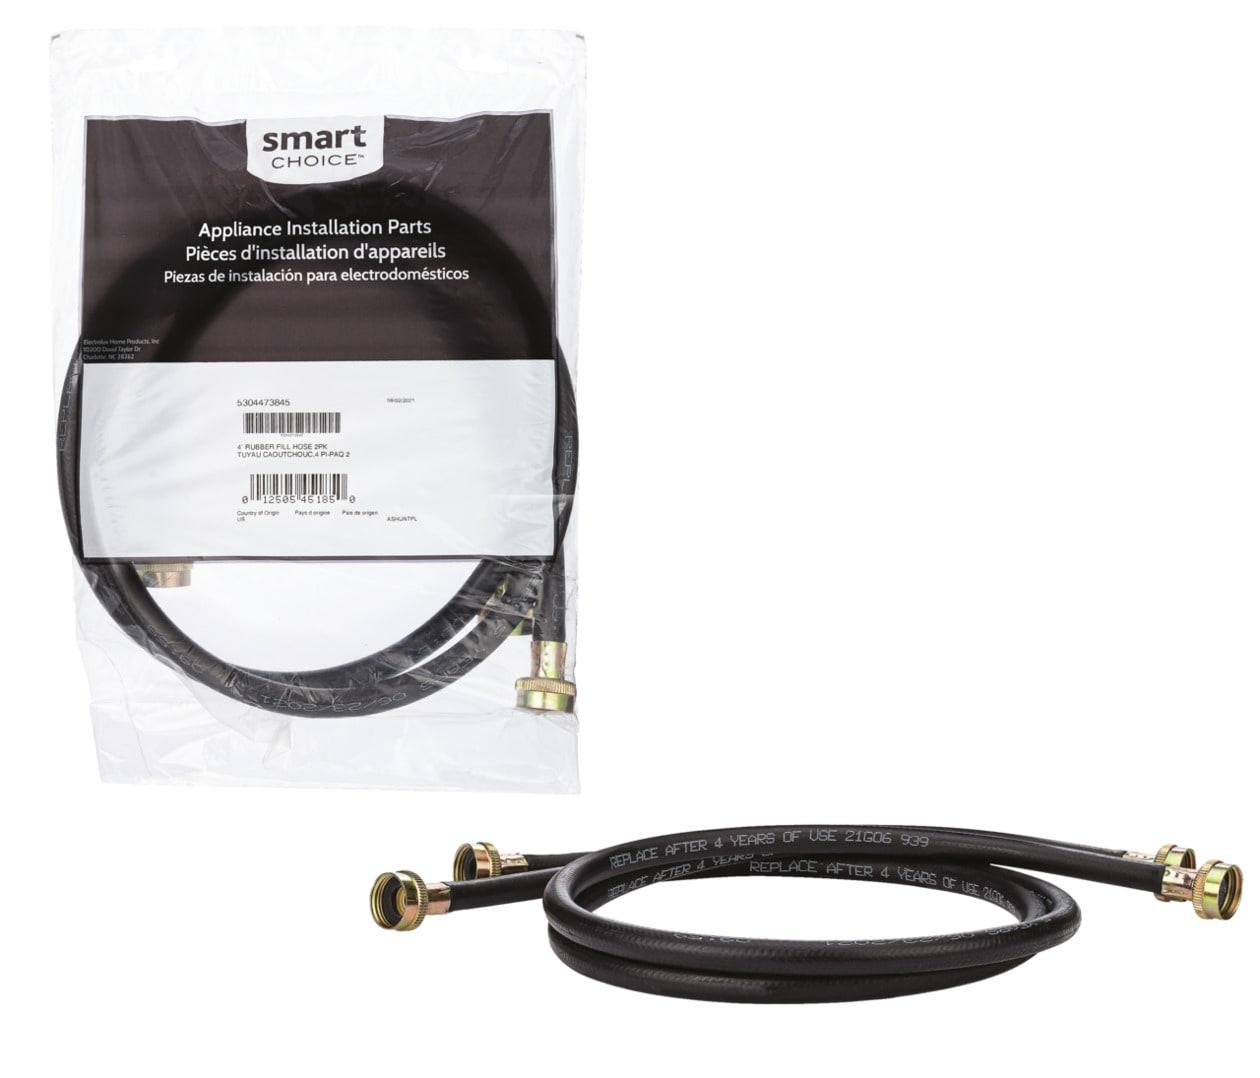 Frigidaire Smart Choice 4' Laundry Rubber Fill Hose - 2 pack